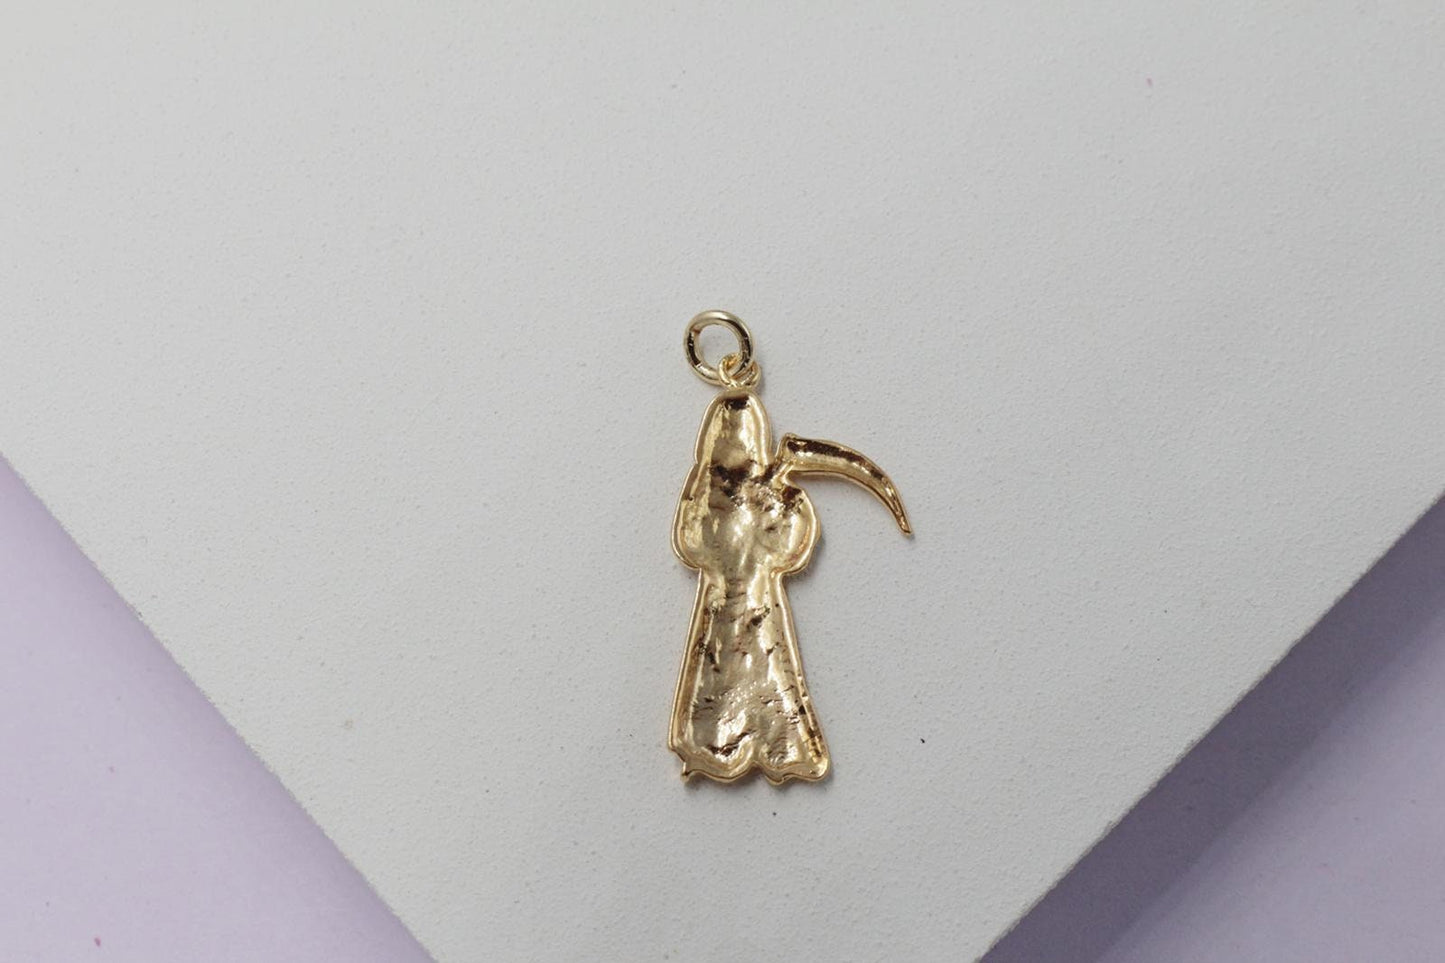 Grim Reaper with Gold or Silver Scythe Pendant